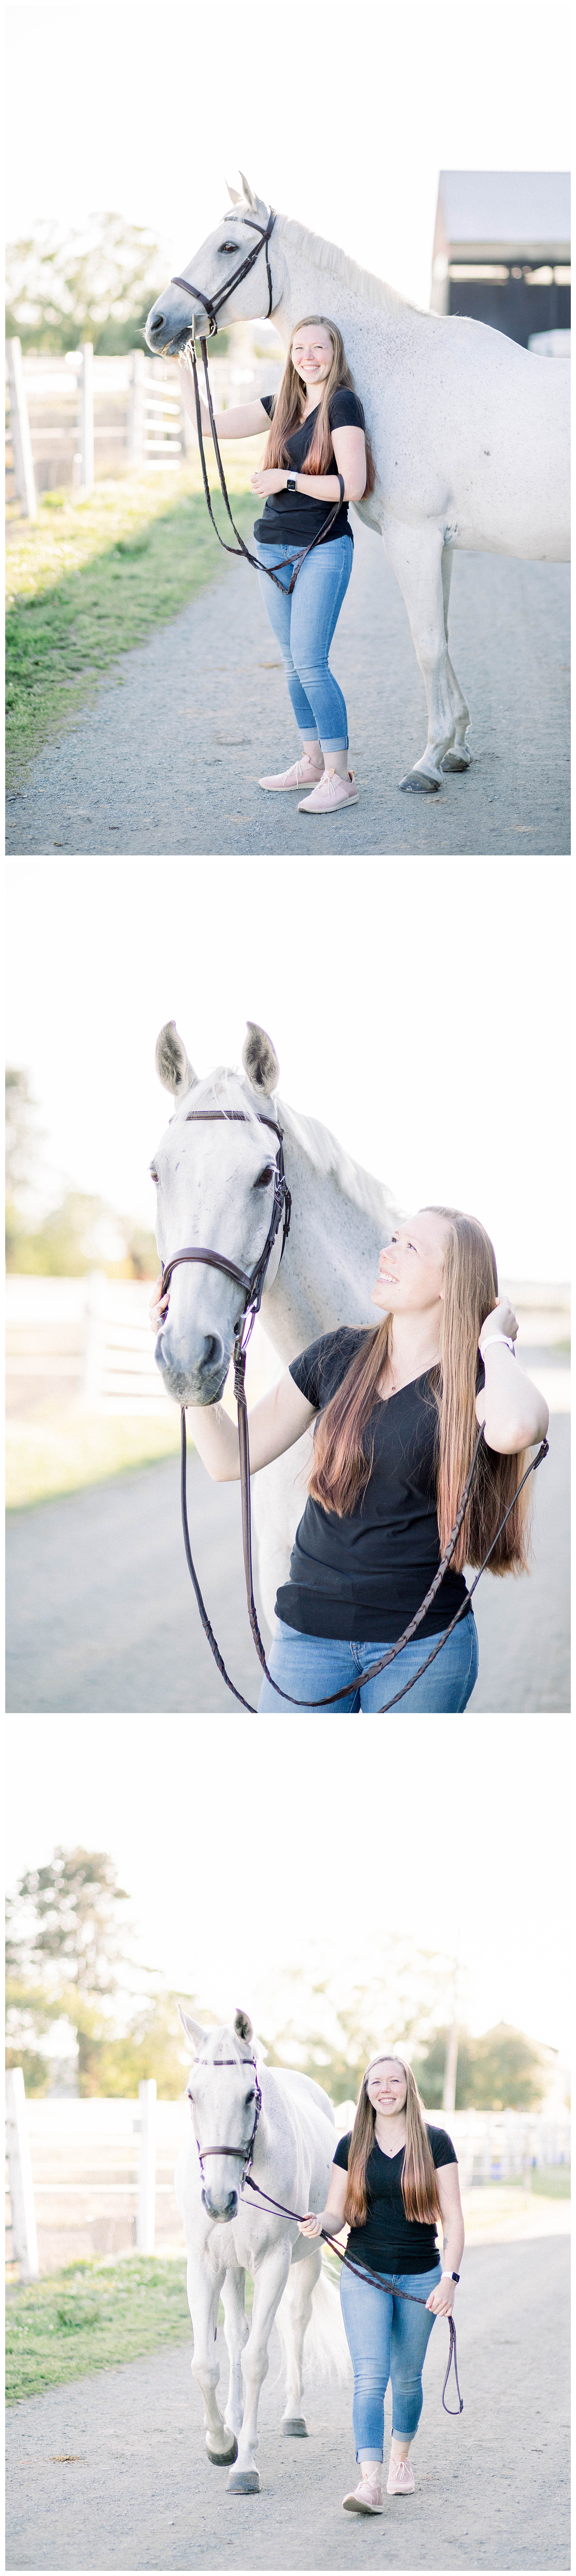 Girl-with-her-white-horse-outside-of-barn-for-photoshoot